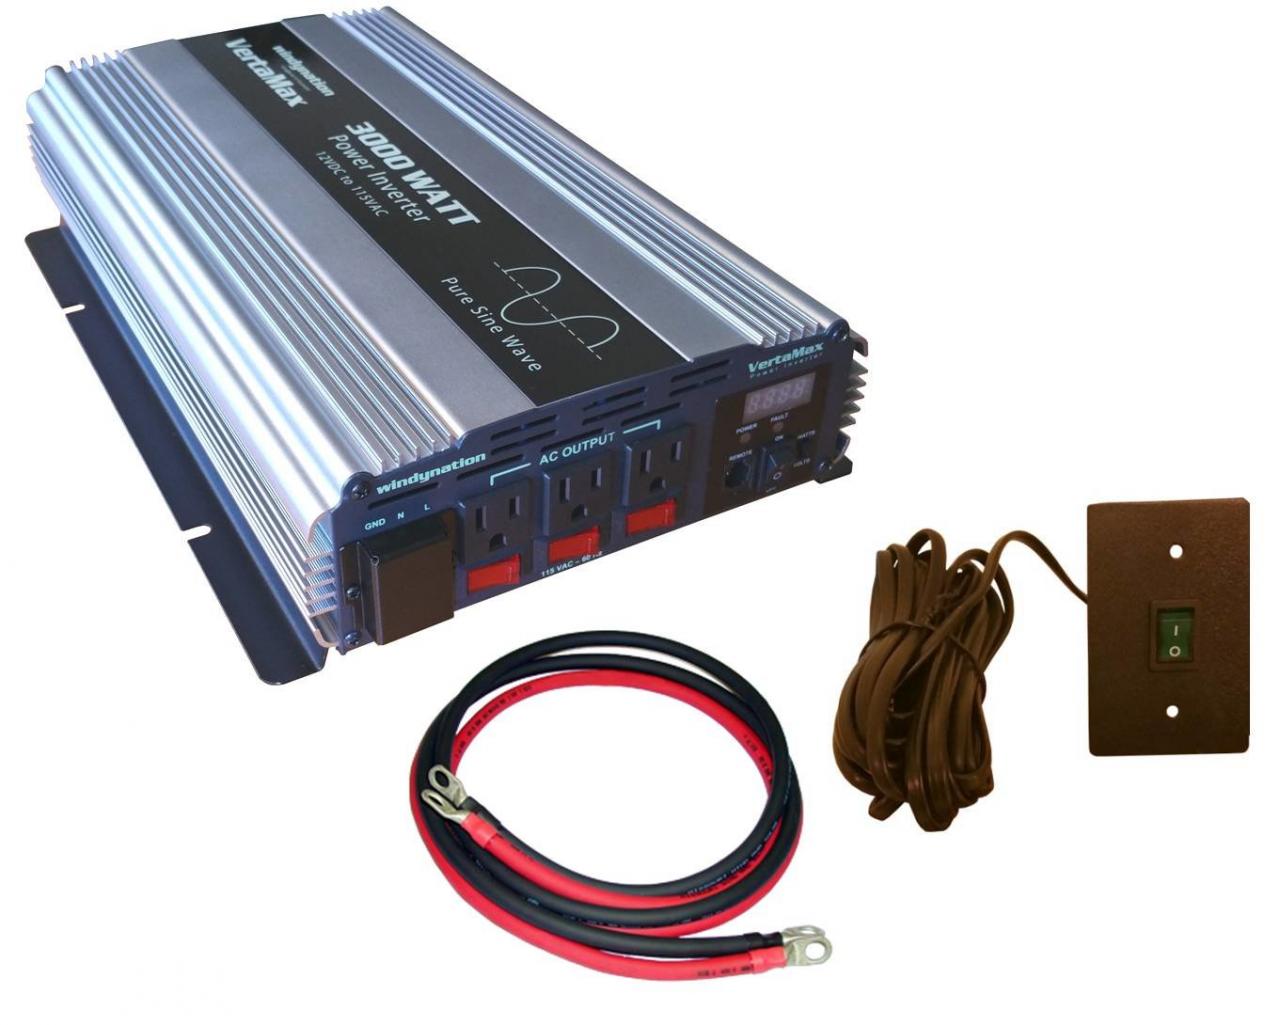 What's the Best Power Inverter for Campervan Electrical?